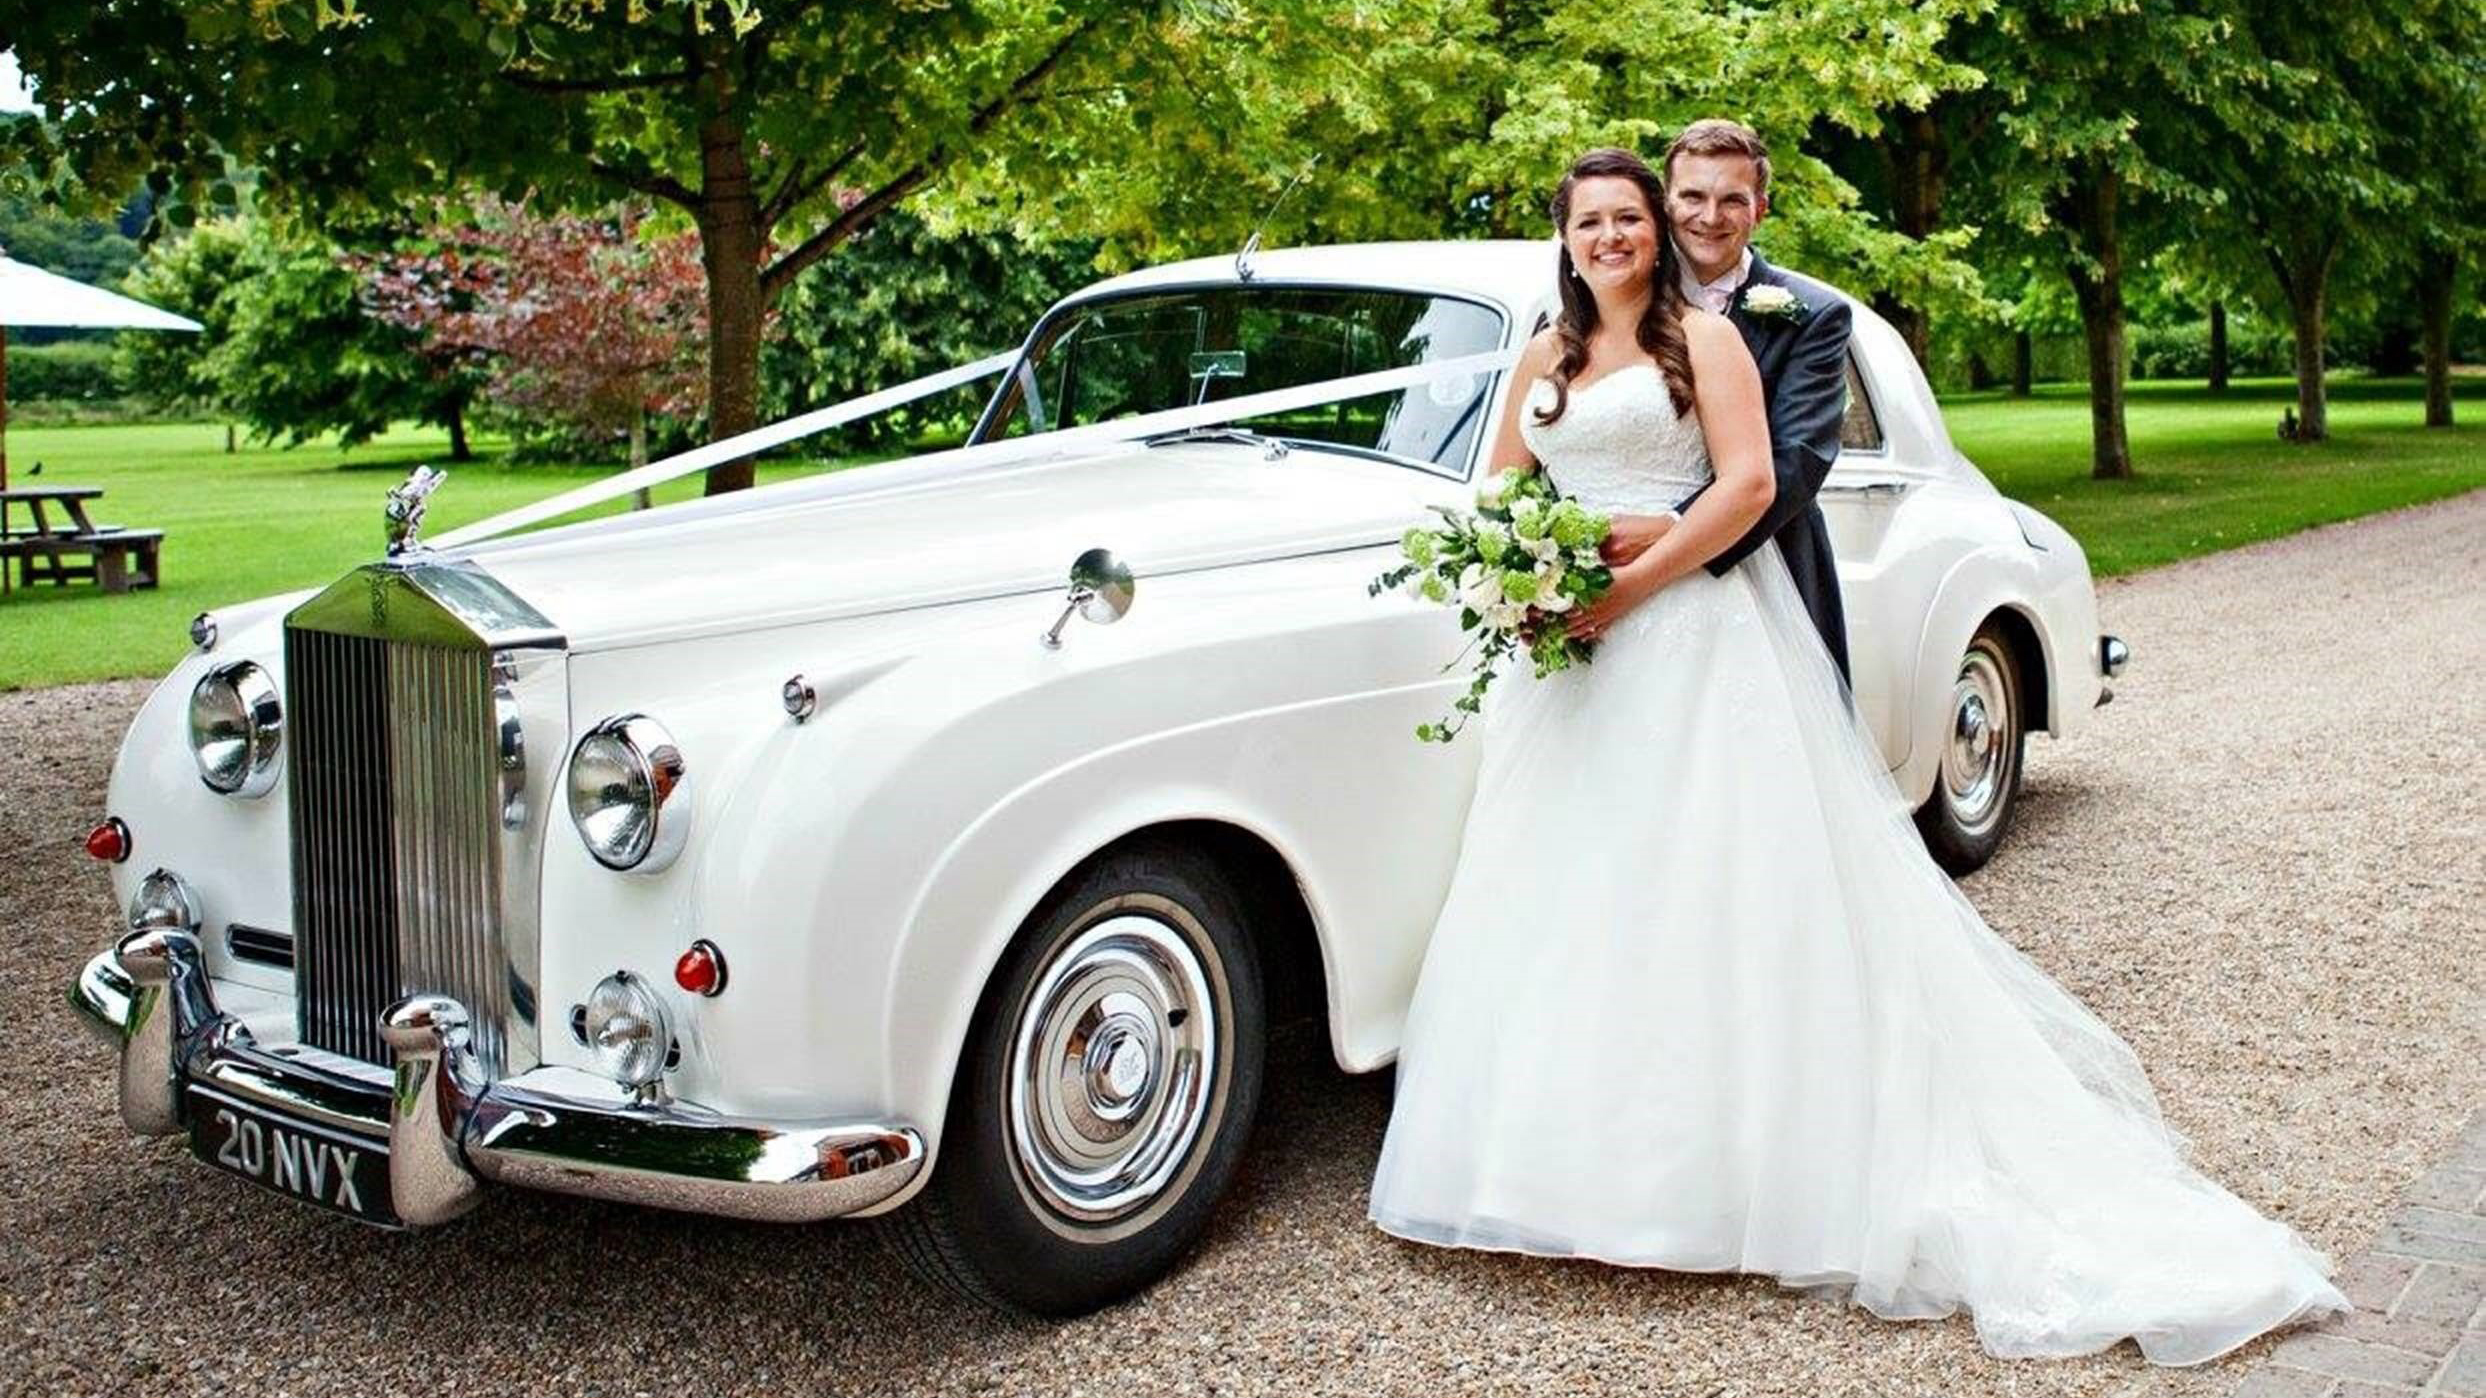 White Rolls-Royce Silver cloud decorated with ivory ribbons parked in the entrance of a wedding venue in Peterborough. Bride and Groom are standing by the vehicle. Groom is holding his Bride in his arms while she holds her bridal bouquet.